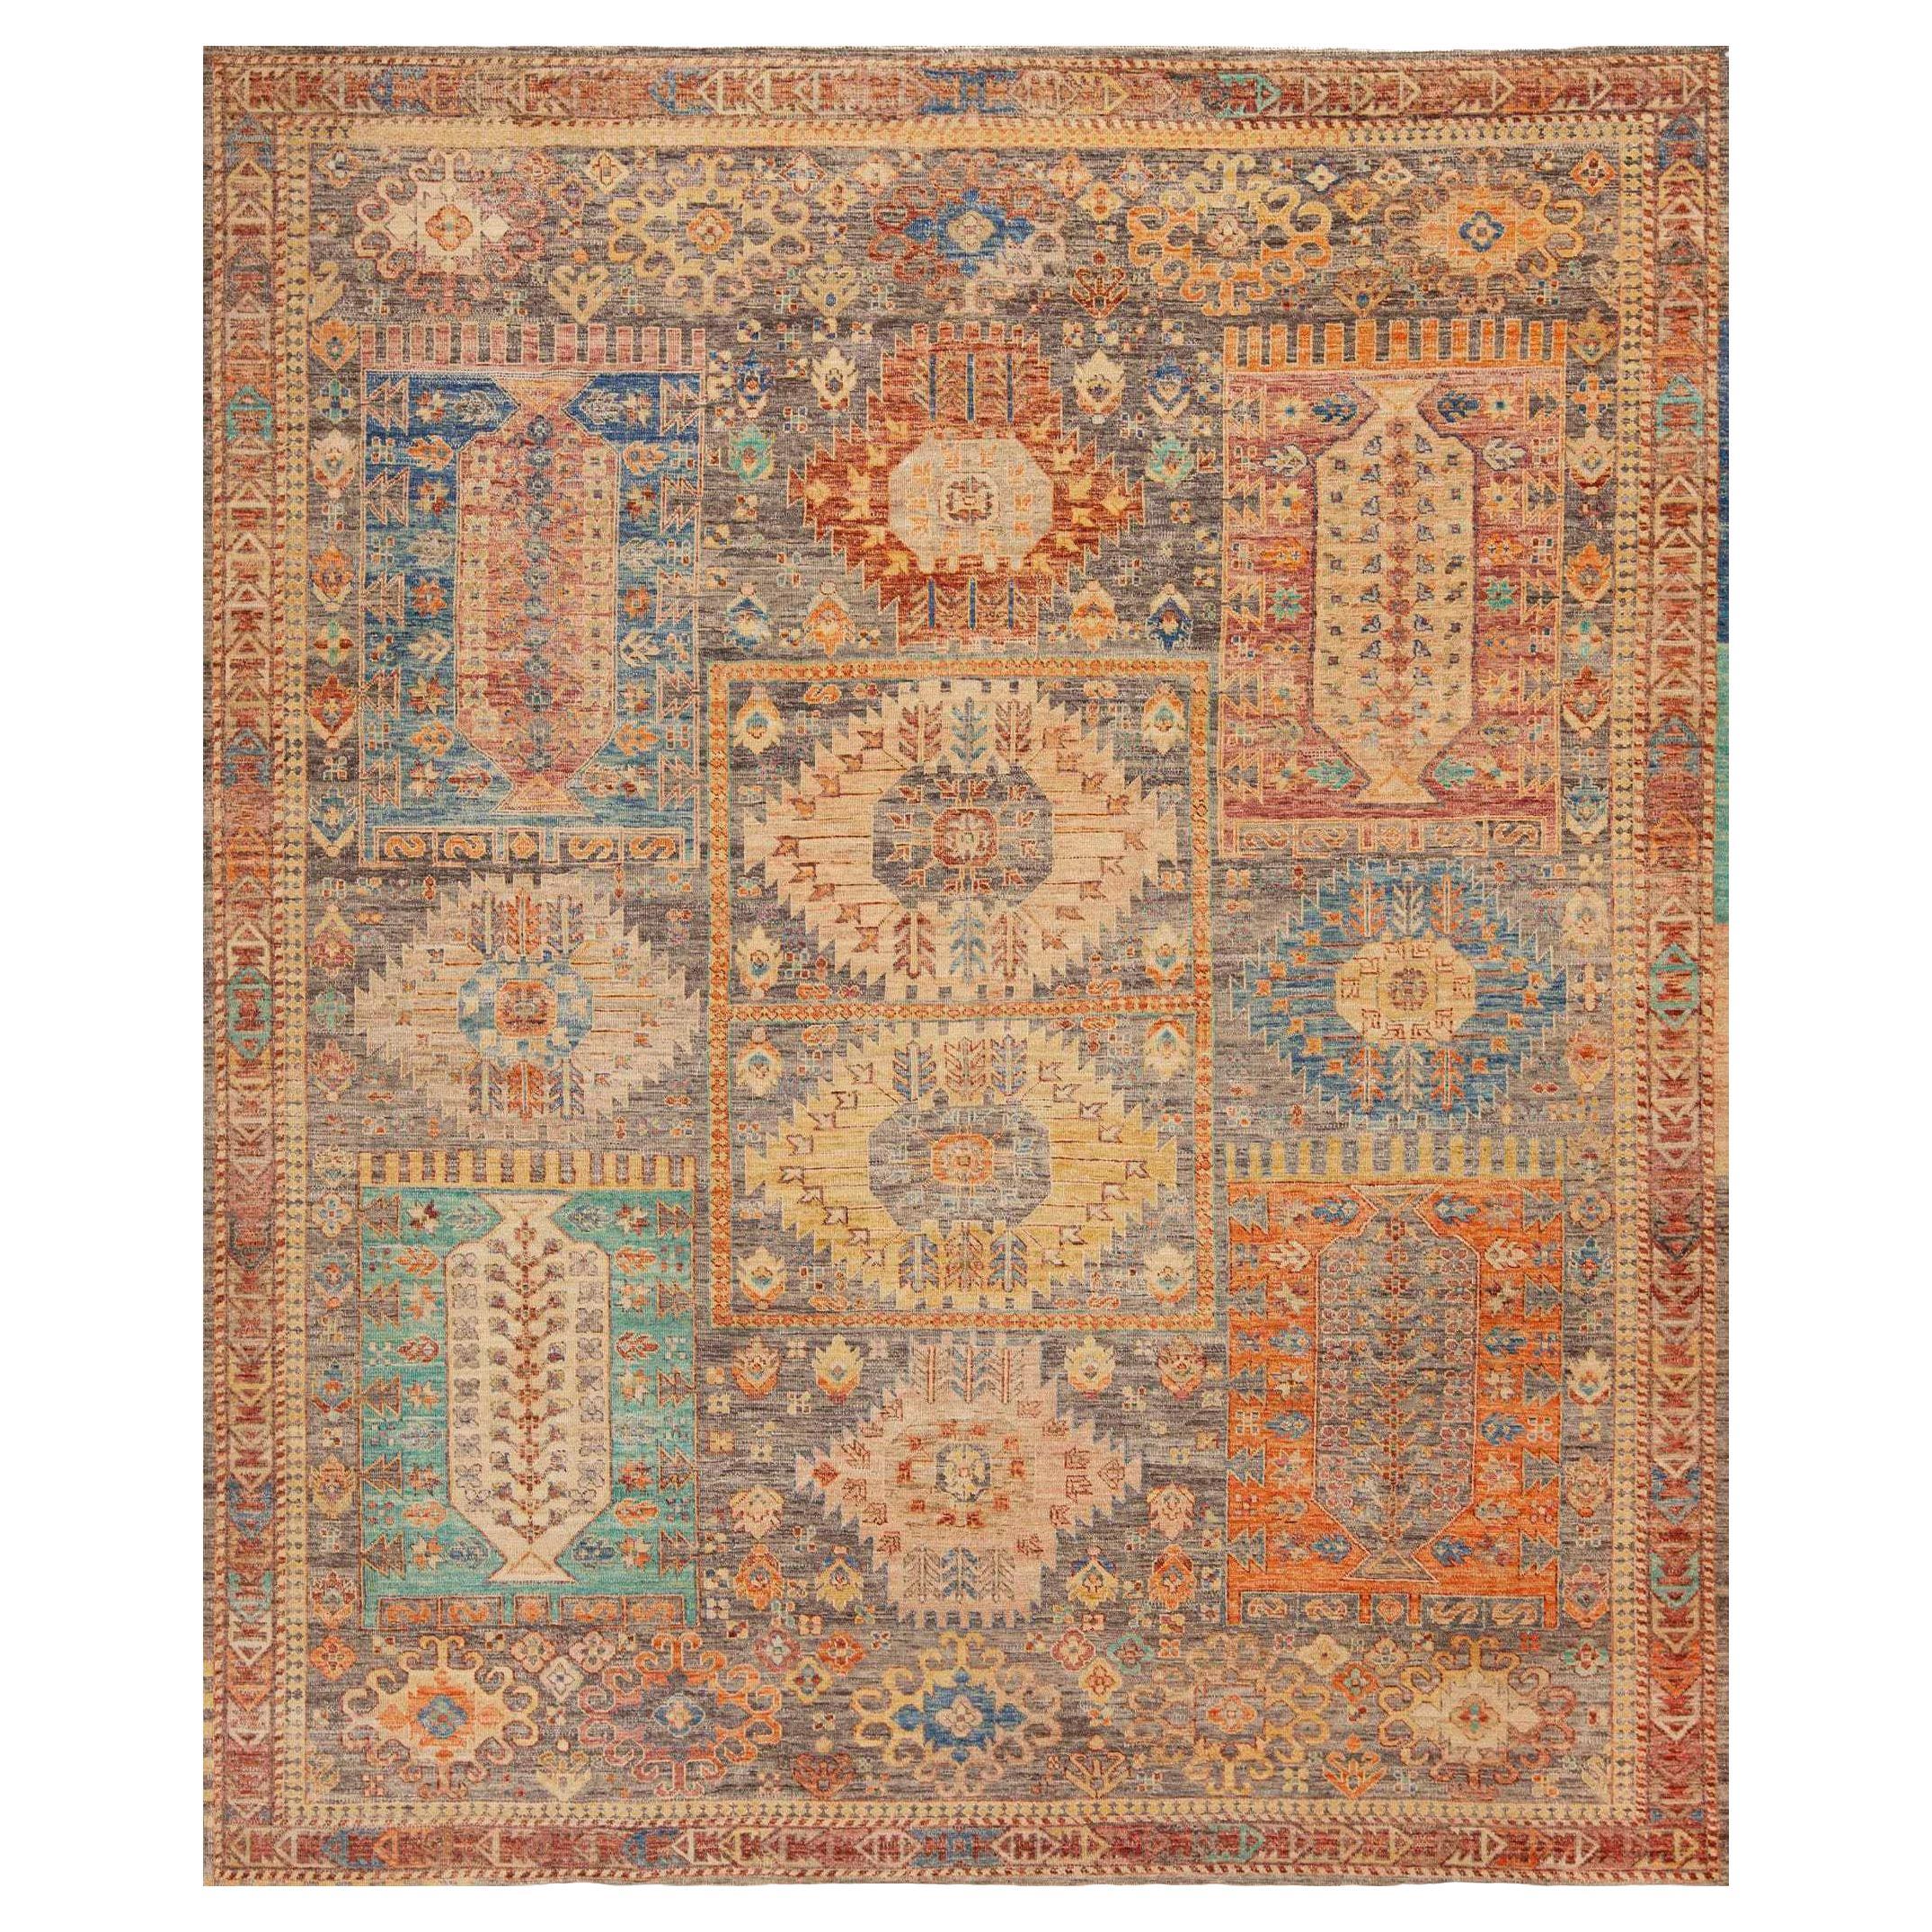 Nazmiyal Collection Rustic Tribal Allover Design Modern Area Rug 8'3" x 9'6"